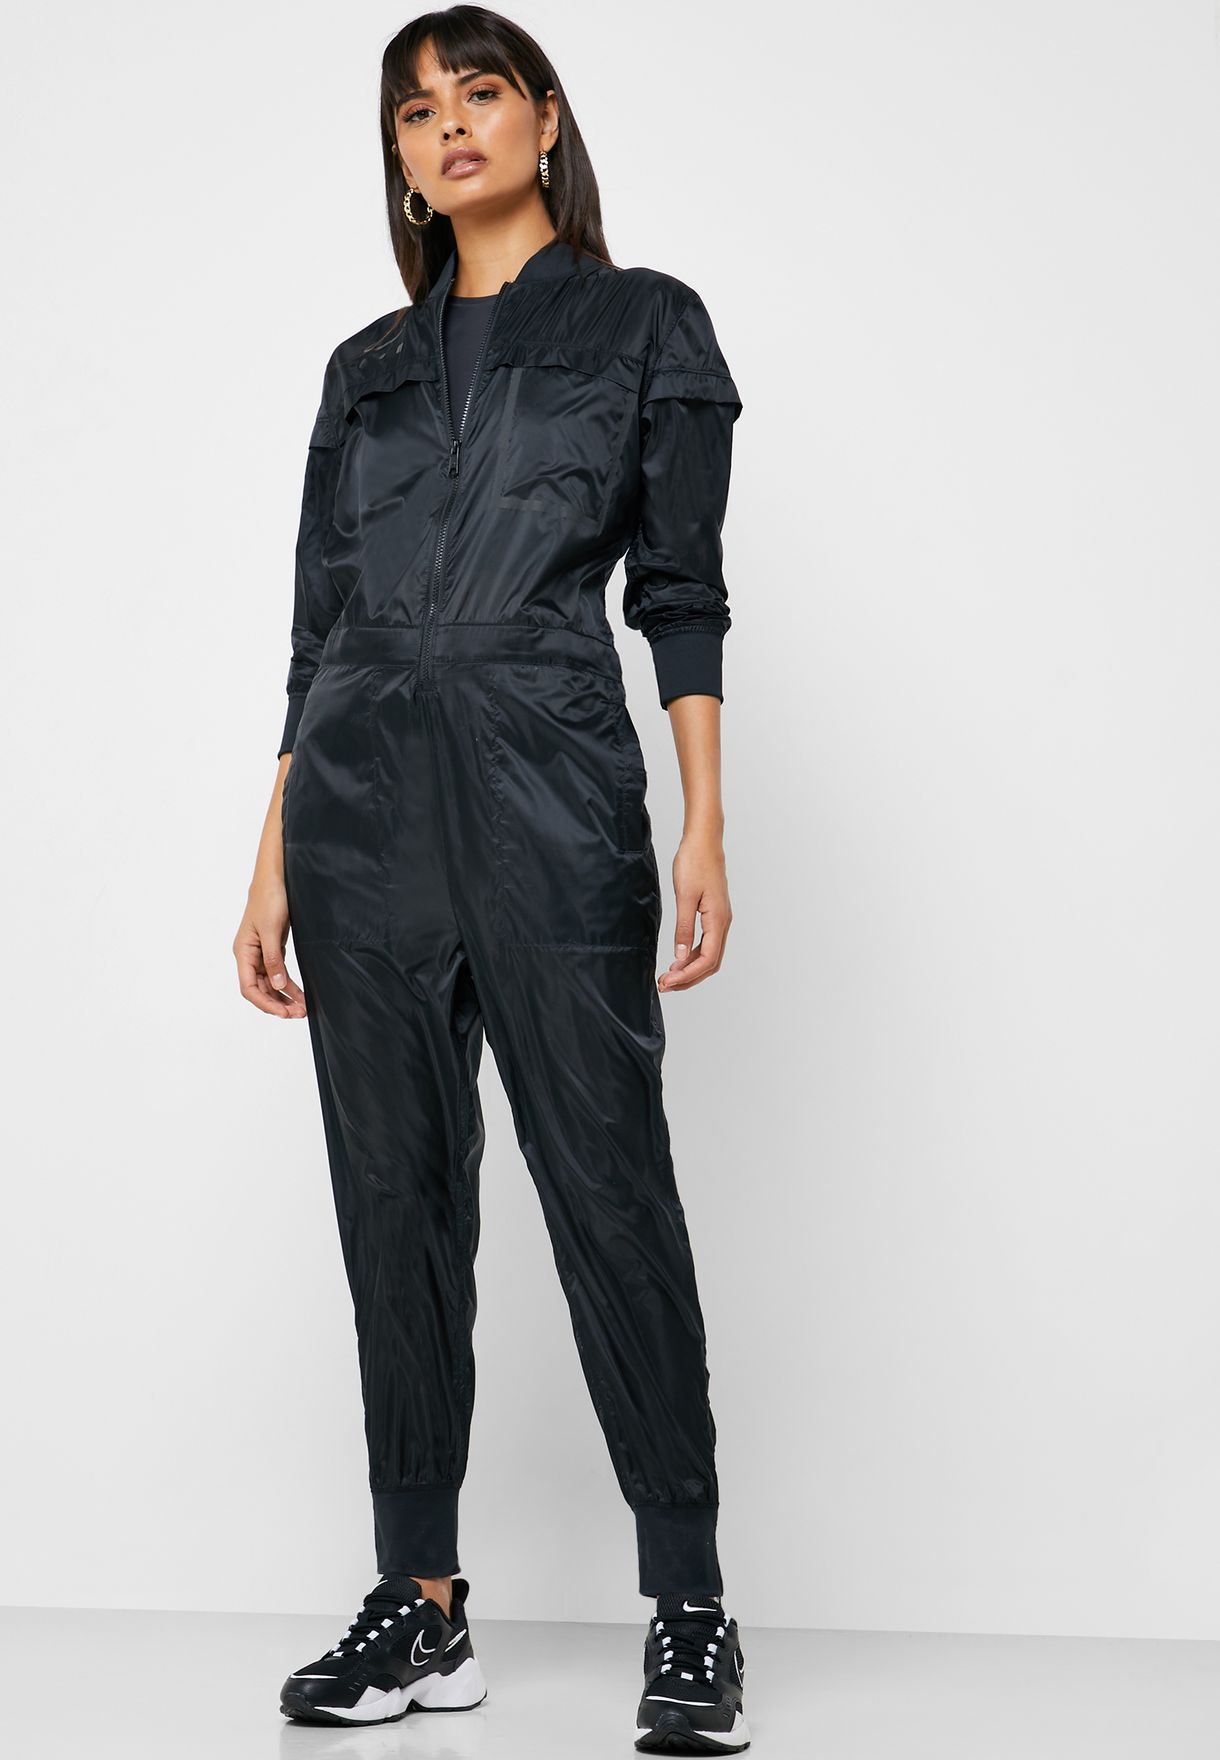 nike air women's one piece jumpsuit